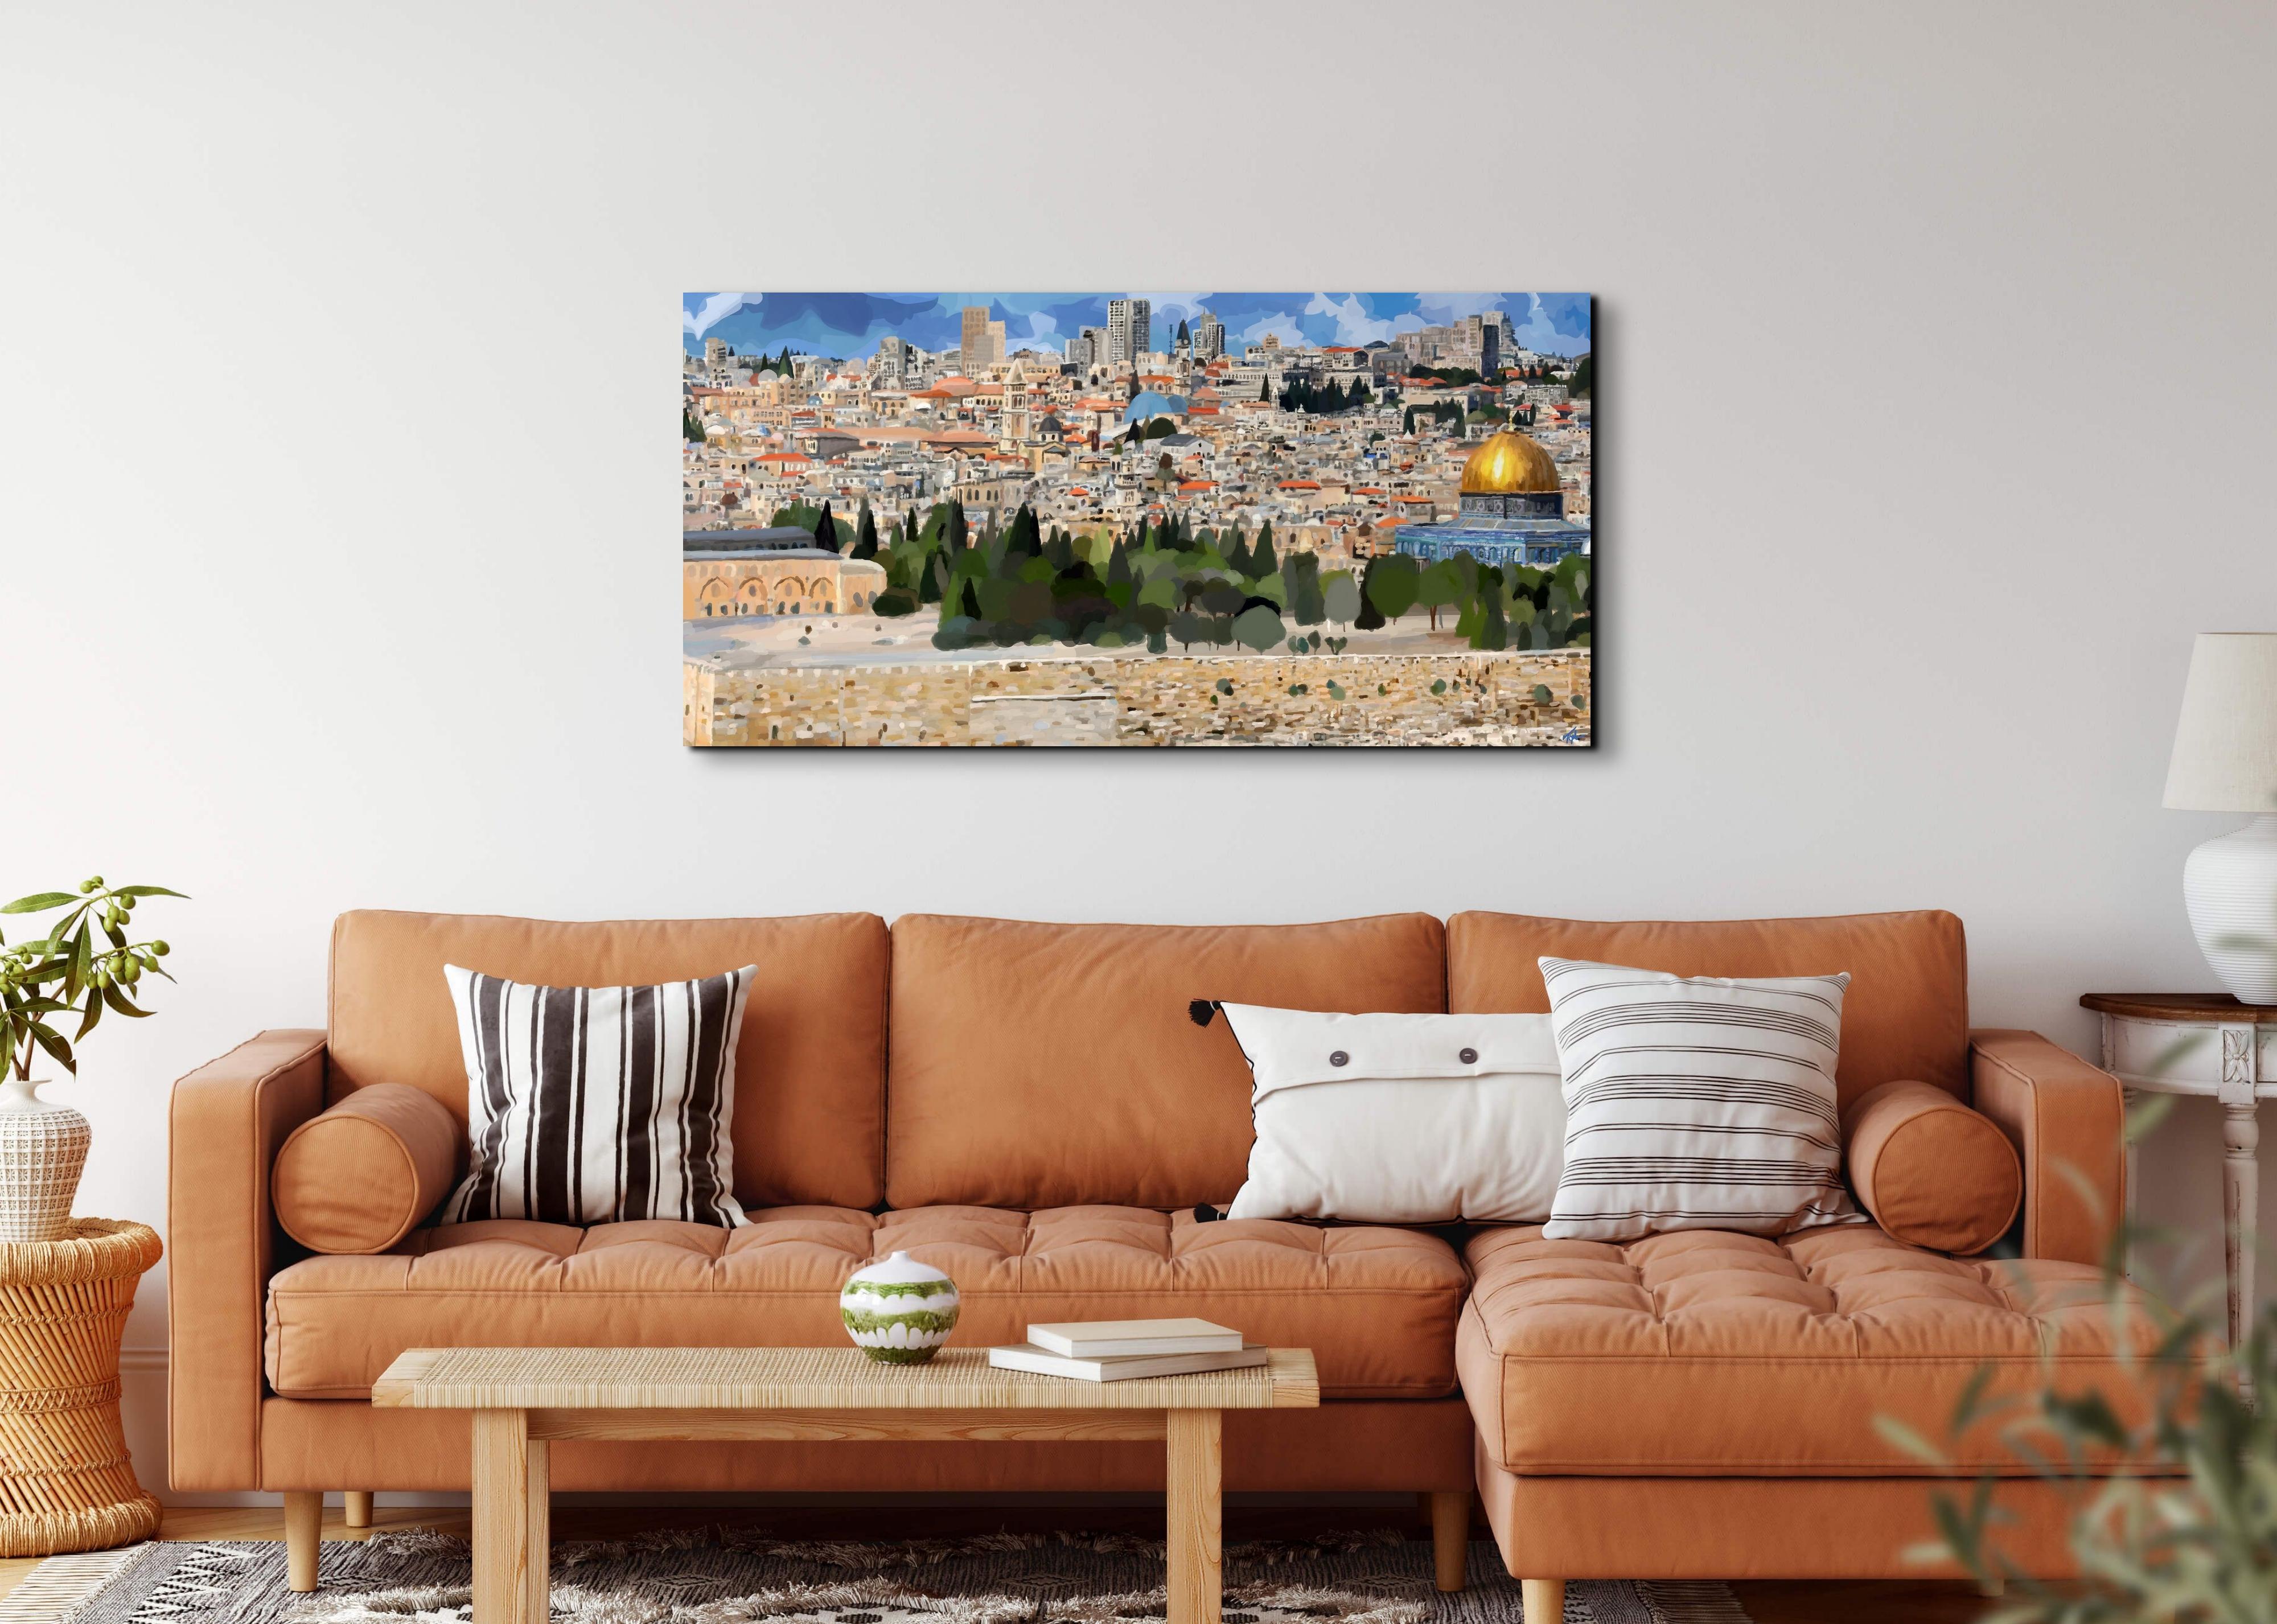 Jerusalem, Contemporary Impressionist Landscape, 2023, Limited Edition - Painting by Topher Straus